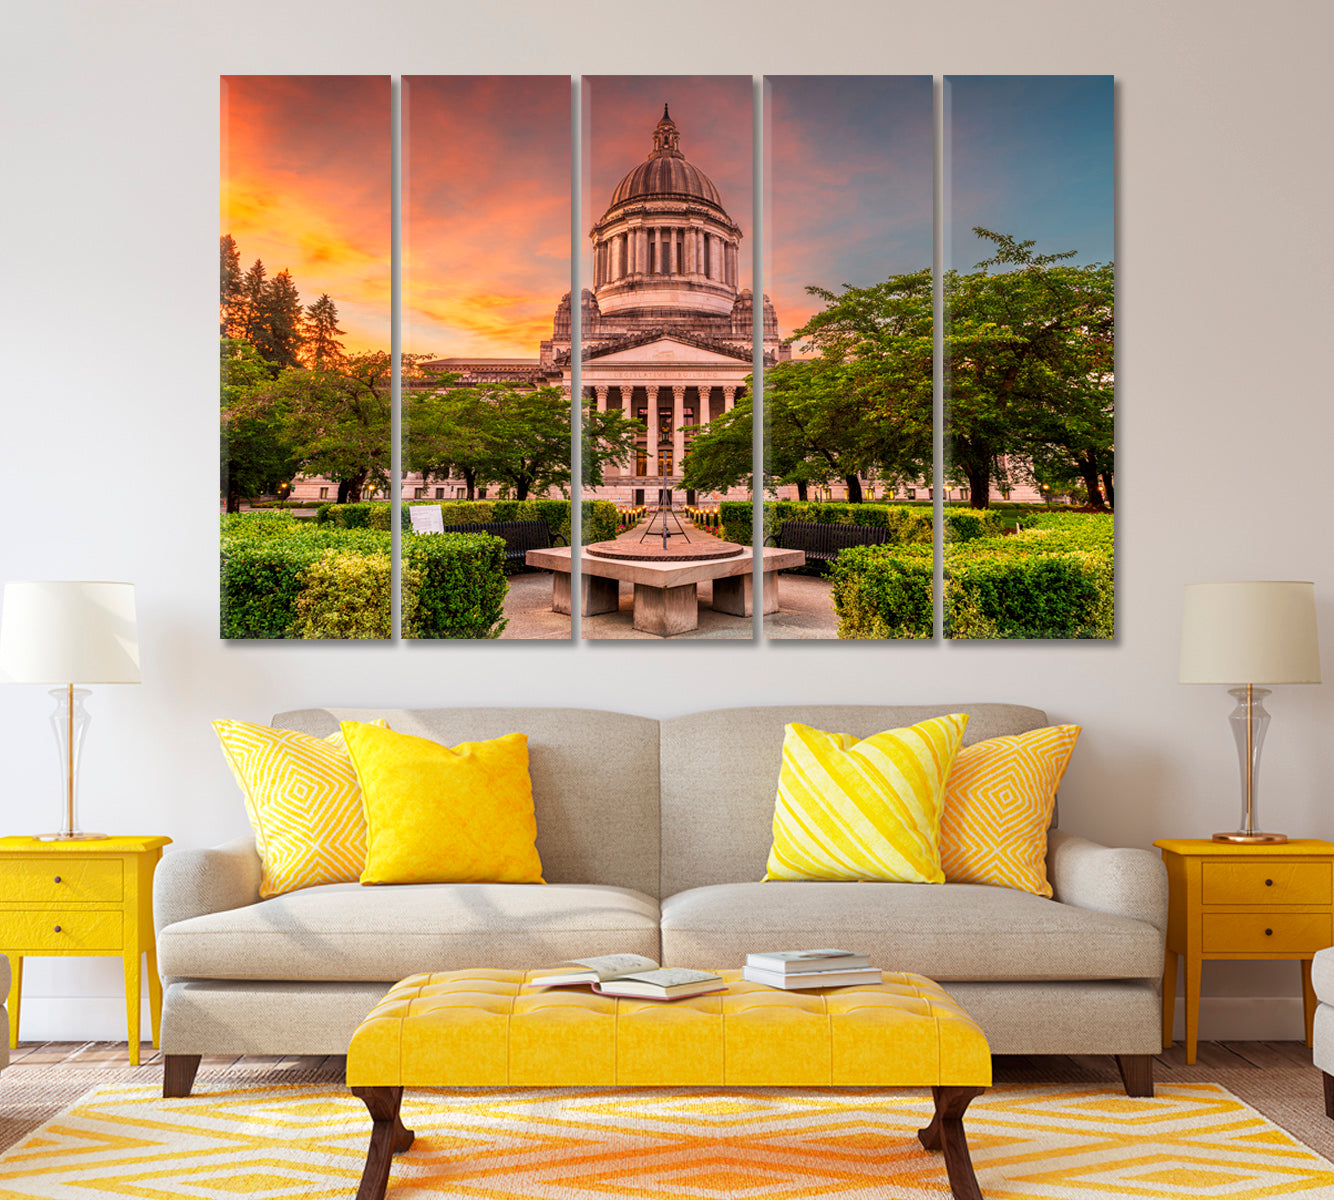 US Capitol Building Olympia Washington Canvas Print ArtLexy 5 Panels 36"x24" inches 